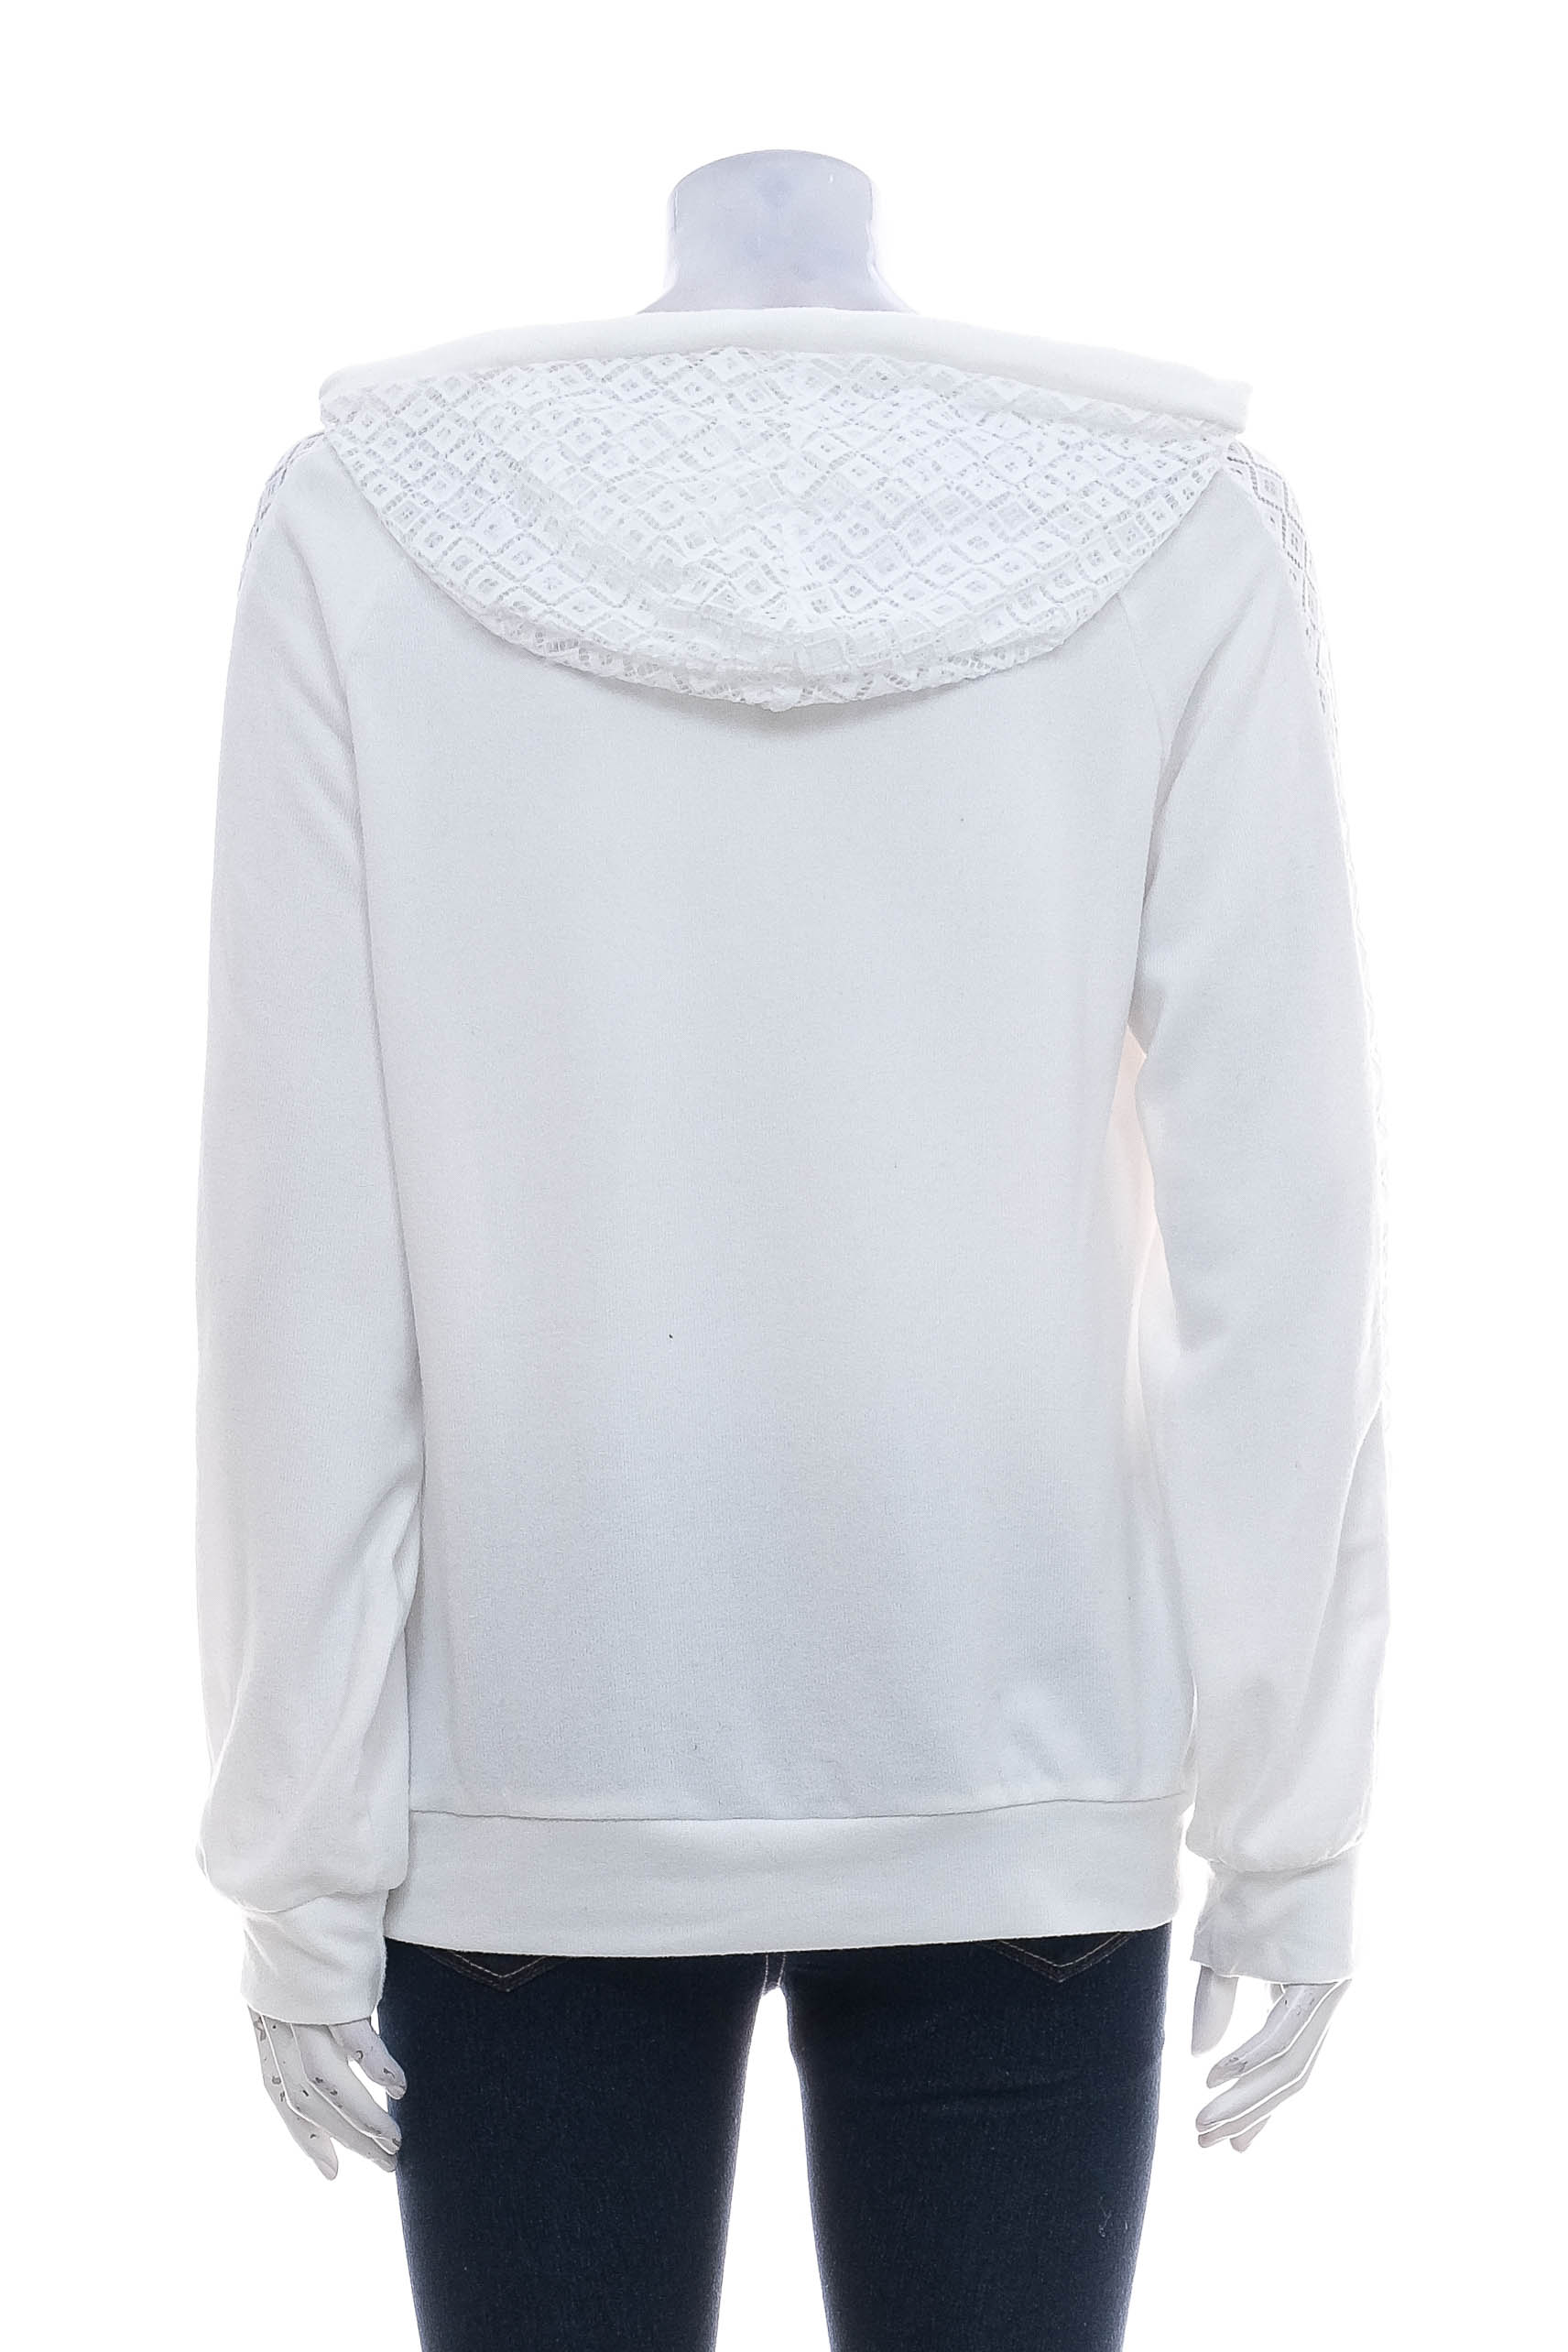 Women's sweater - Perout - 1